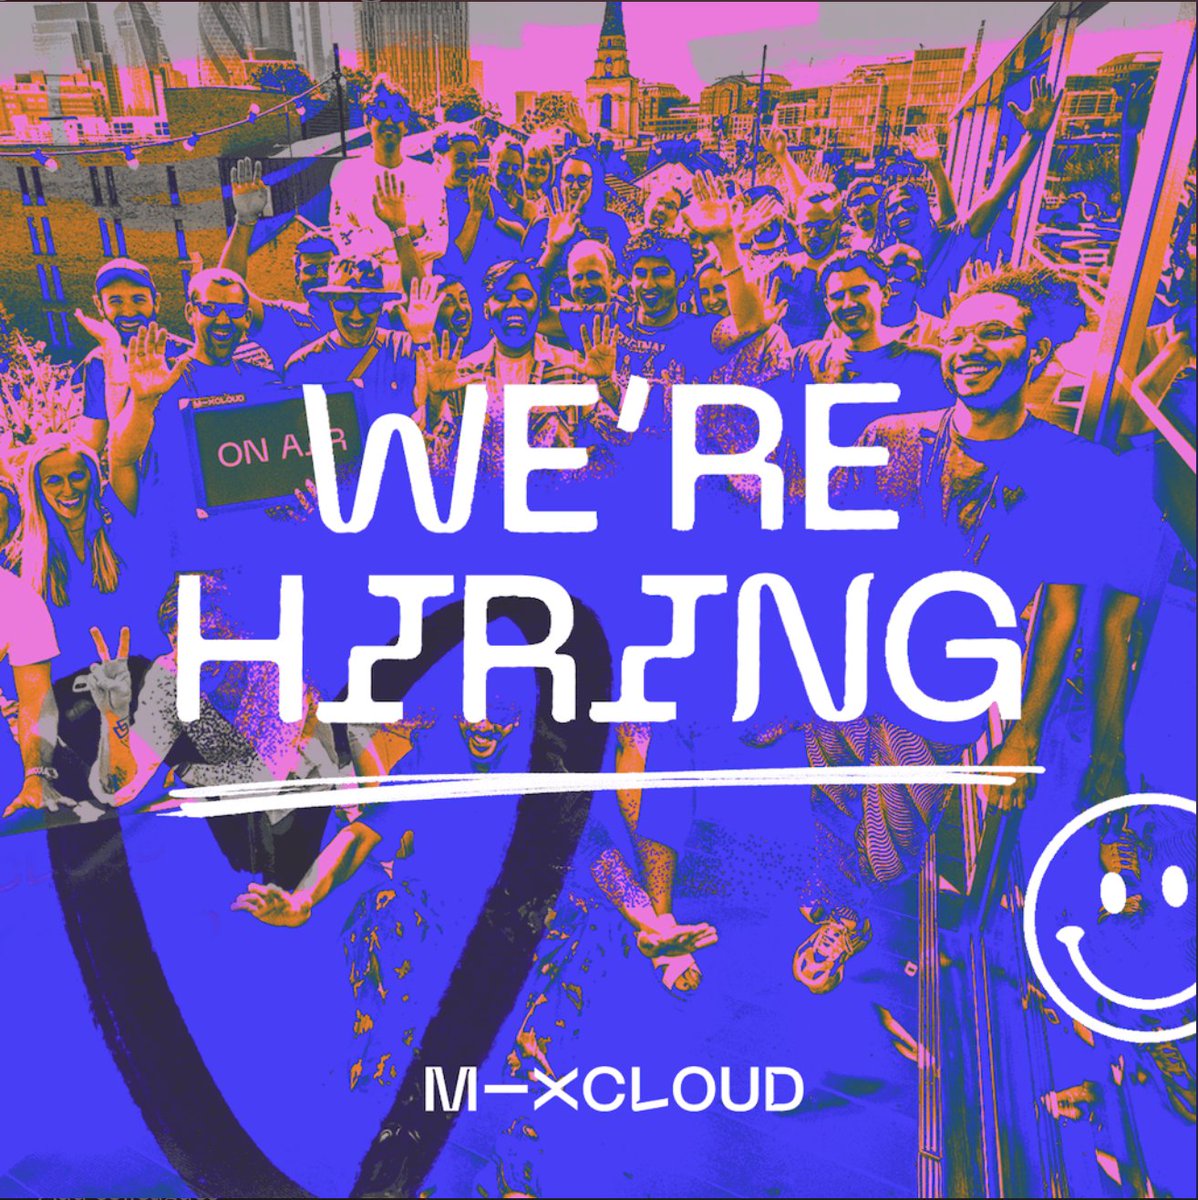 Mixcloud is hiring! We’re looking for a UK-based Finance Controller who is hyper-organised, tech-savvy and has at least 5 years experience in an accounting or finance role. Apply today: apply.workable.com/mixcloud-limit…